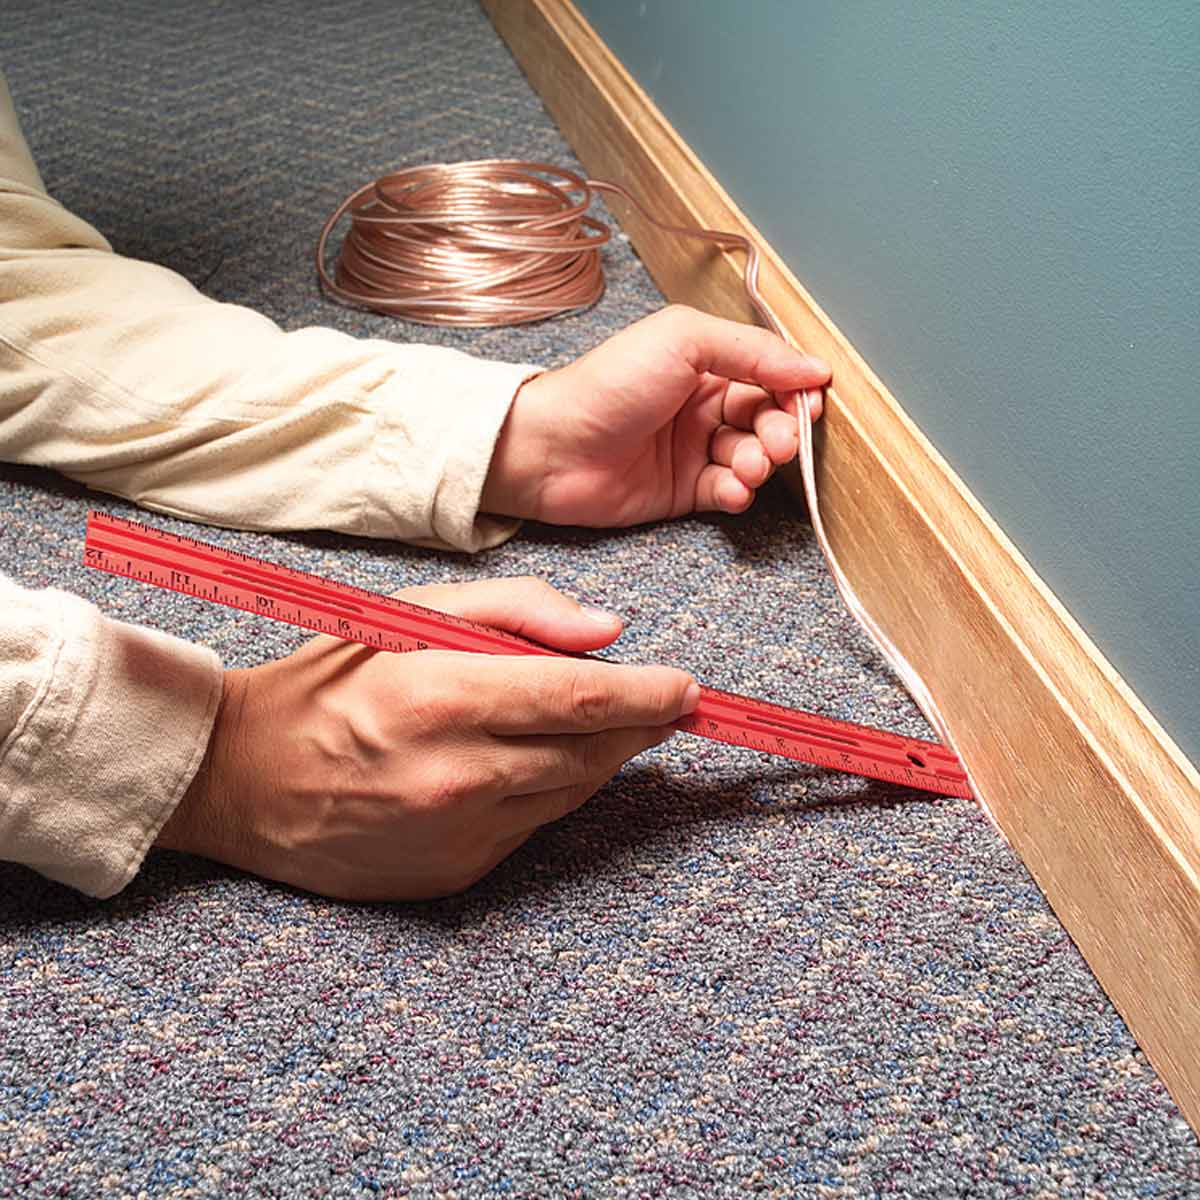 hide wires between carpet and baseboard